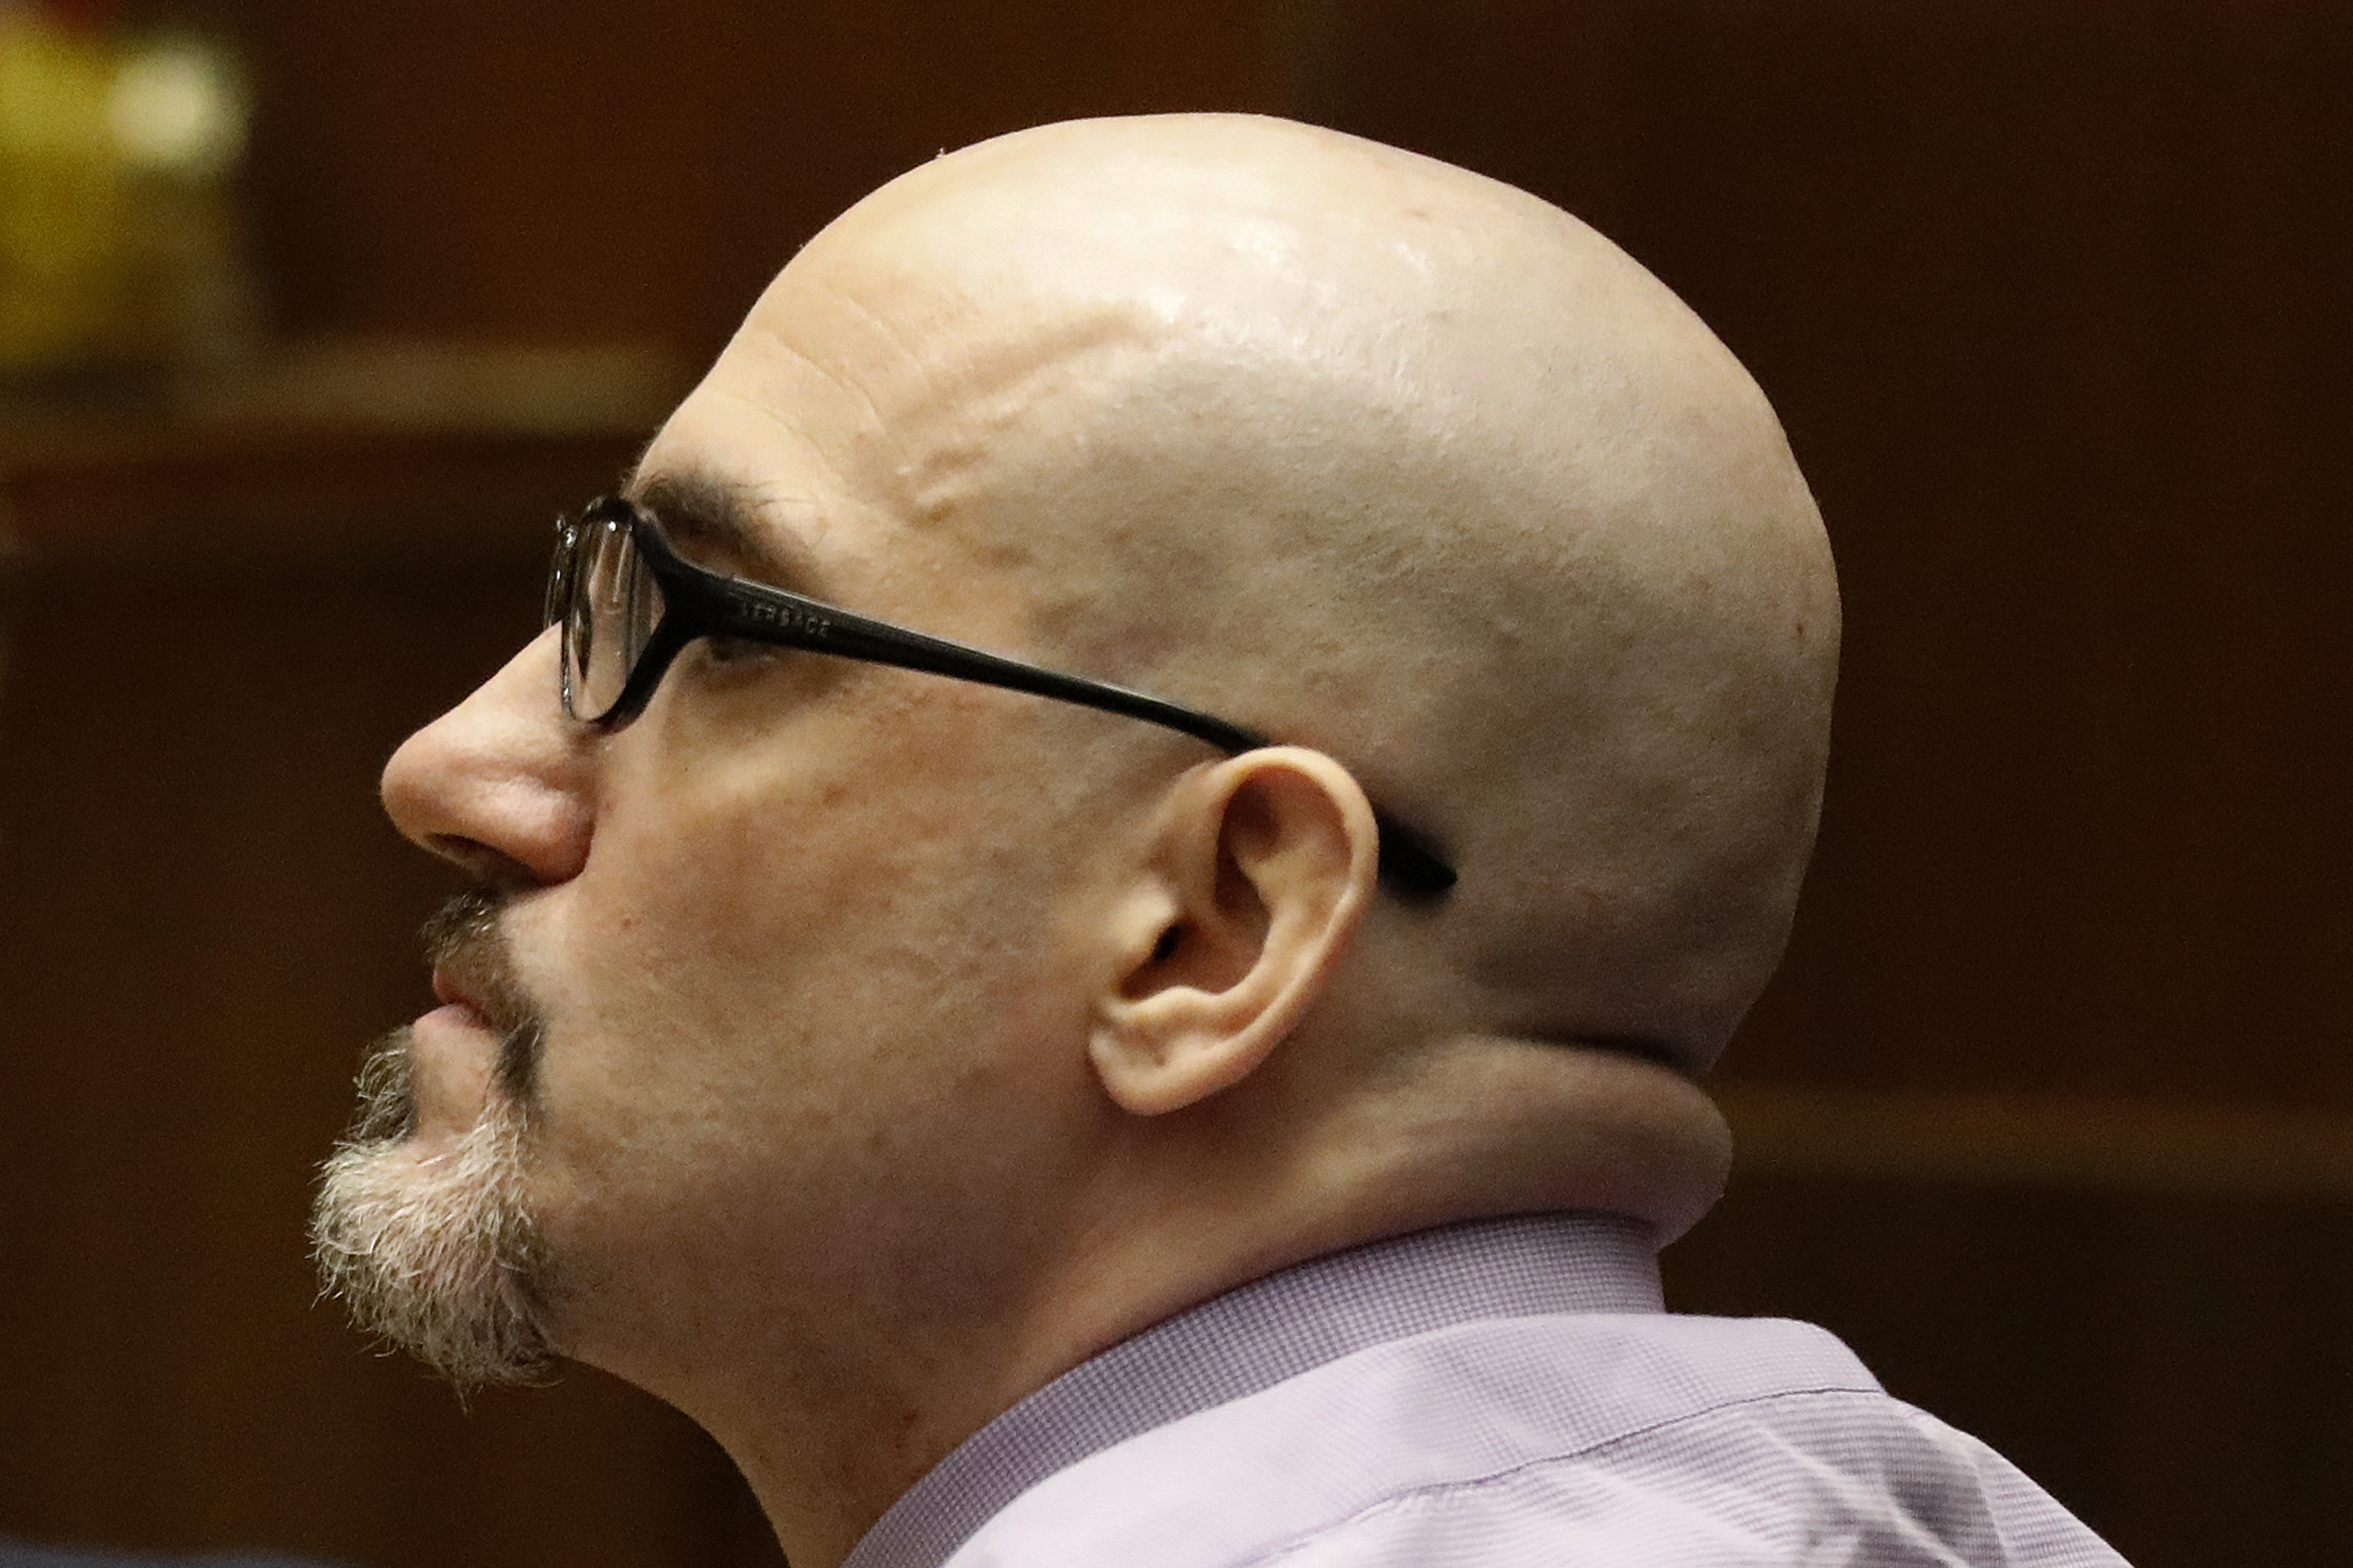 Michael Gargiulo appears in court for opening statements in his murder trial on May 2, 2019, in Los Angeles. (Credit: Al Seib-Pool/Getty Images)